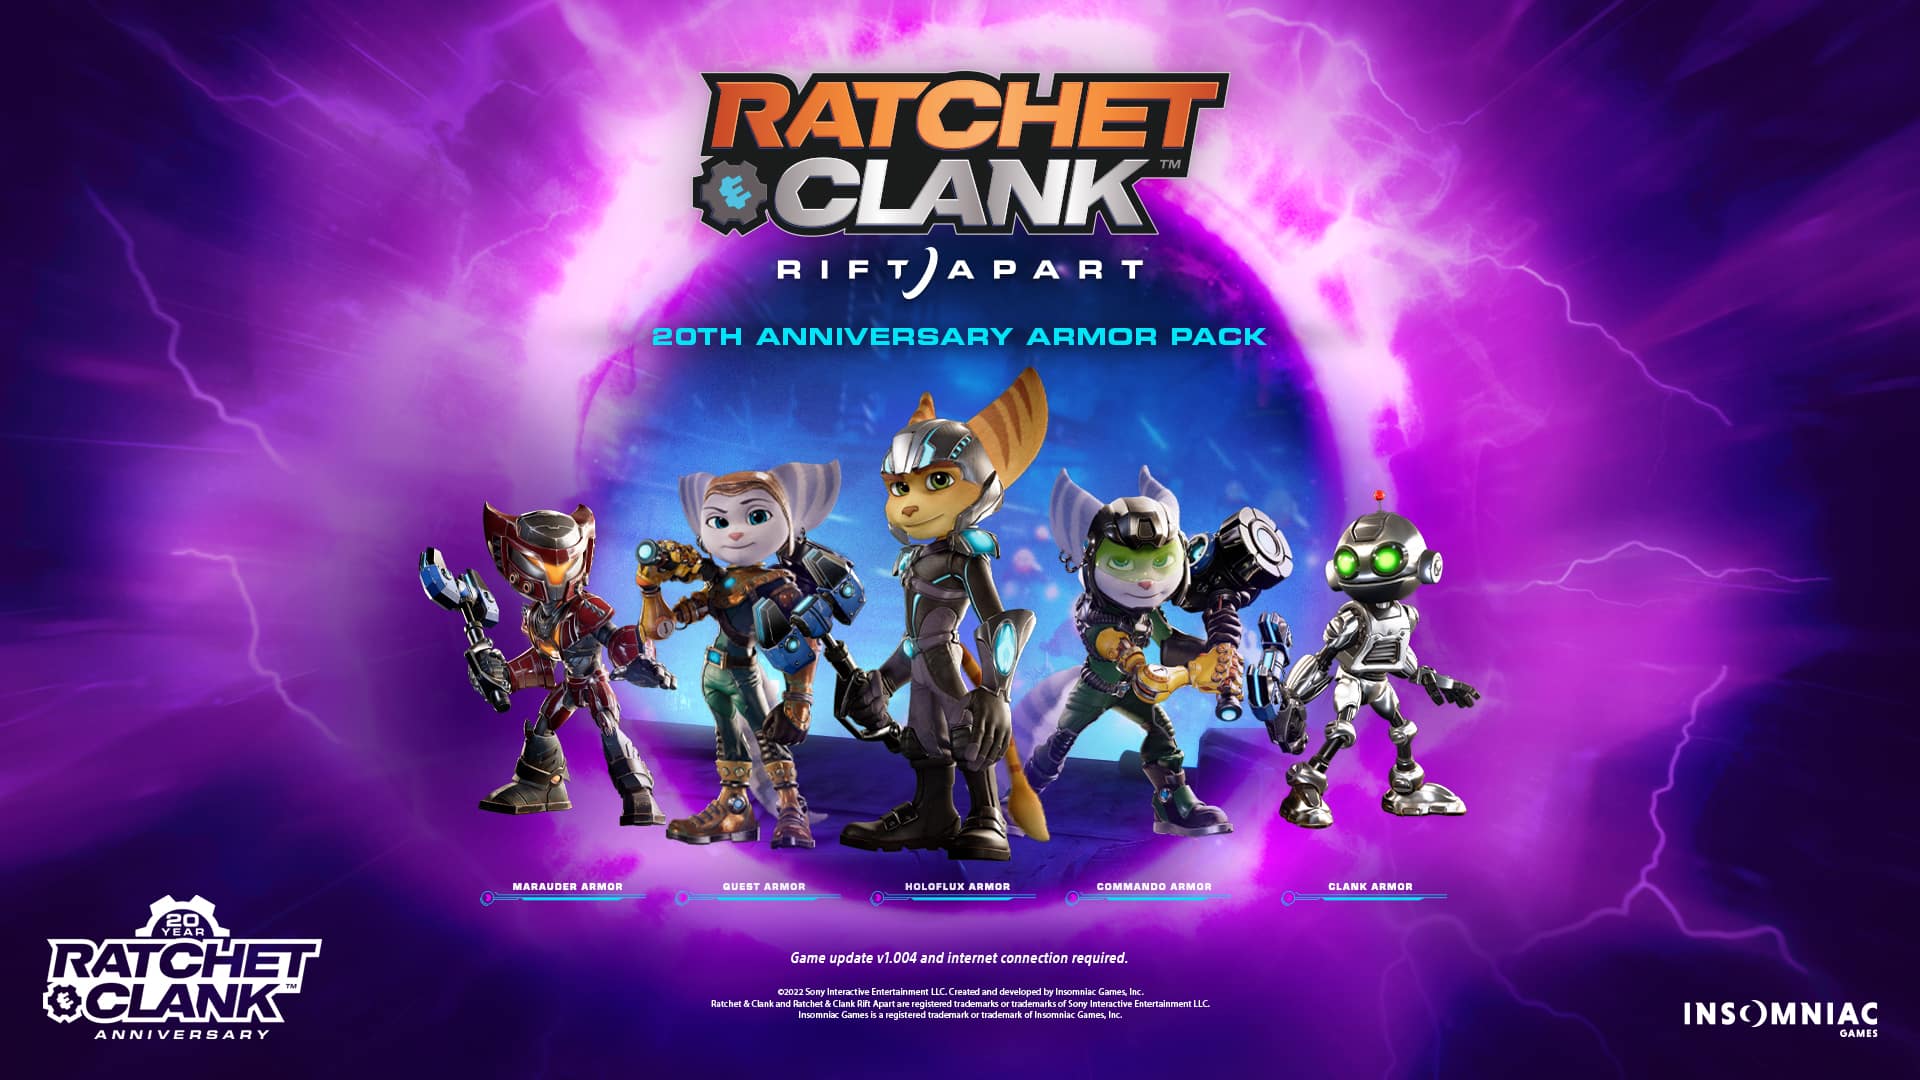 Join Insomniac Games in celebrating 20 years of Ratchet & Clank.